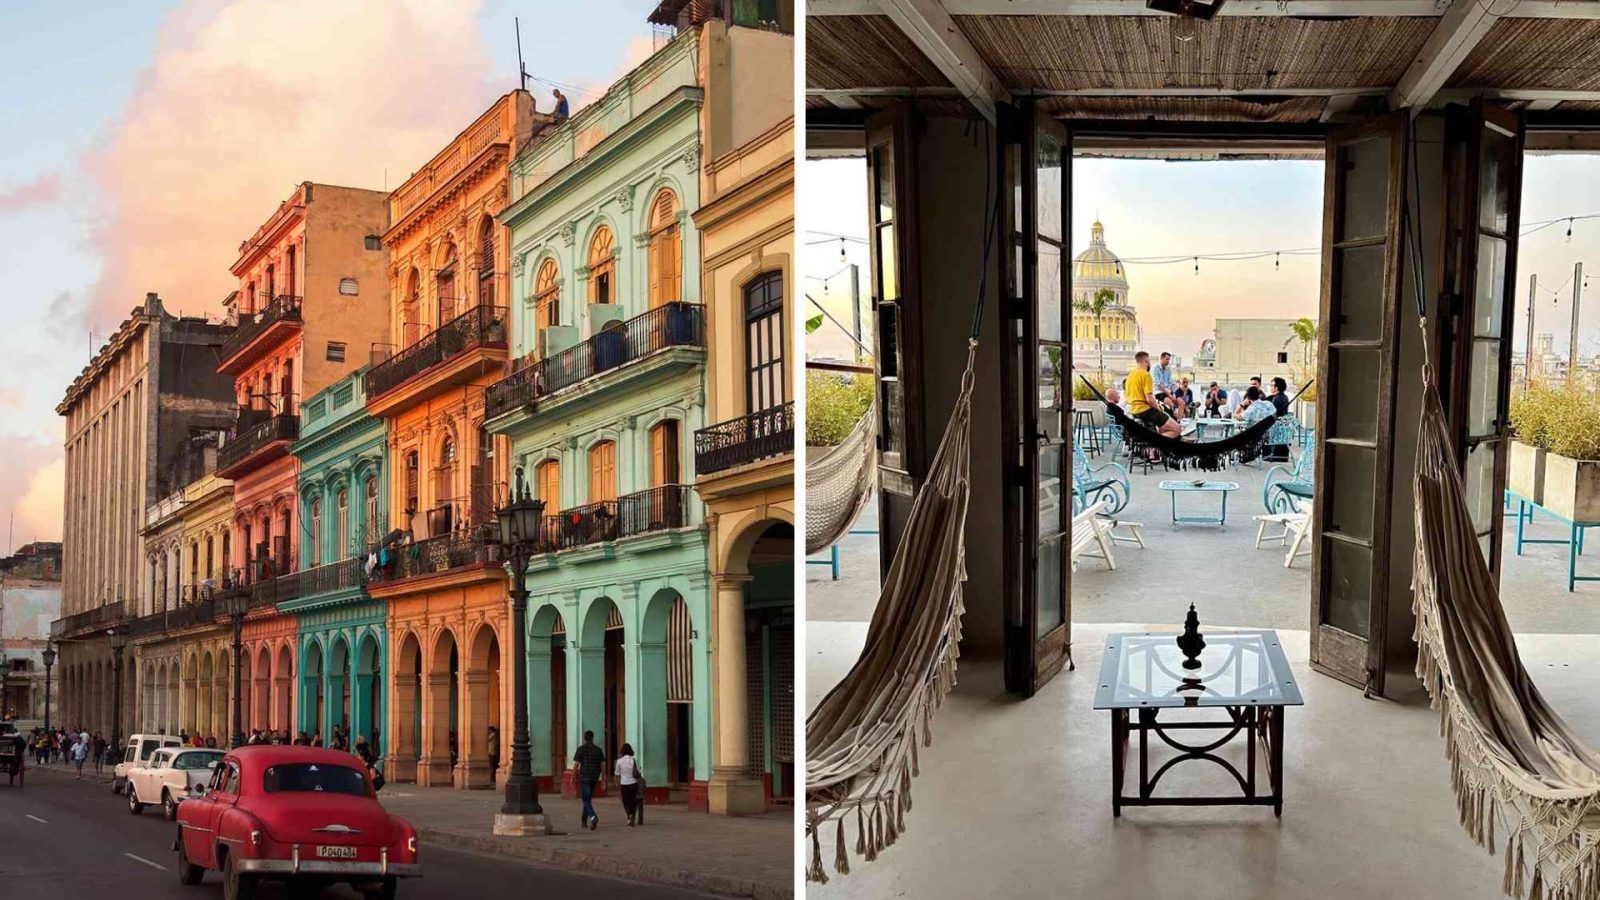 Cuba is the hottest LGBTQ+ friendly destination in the Caribbean